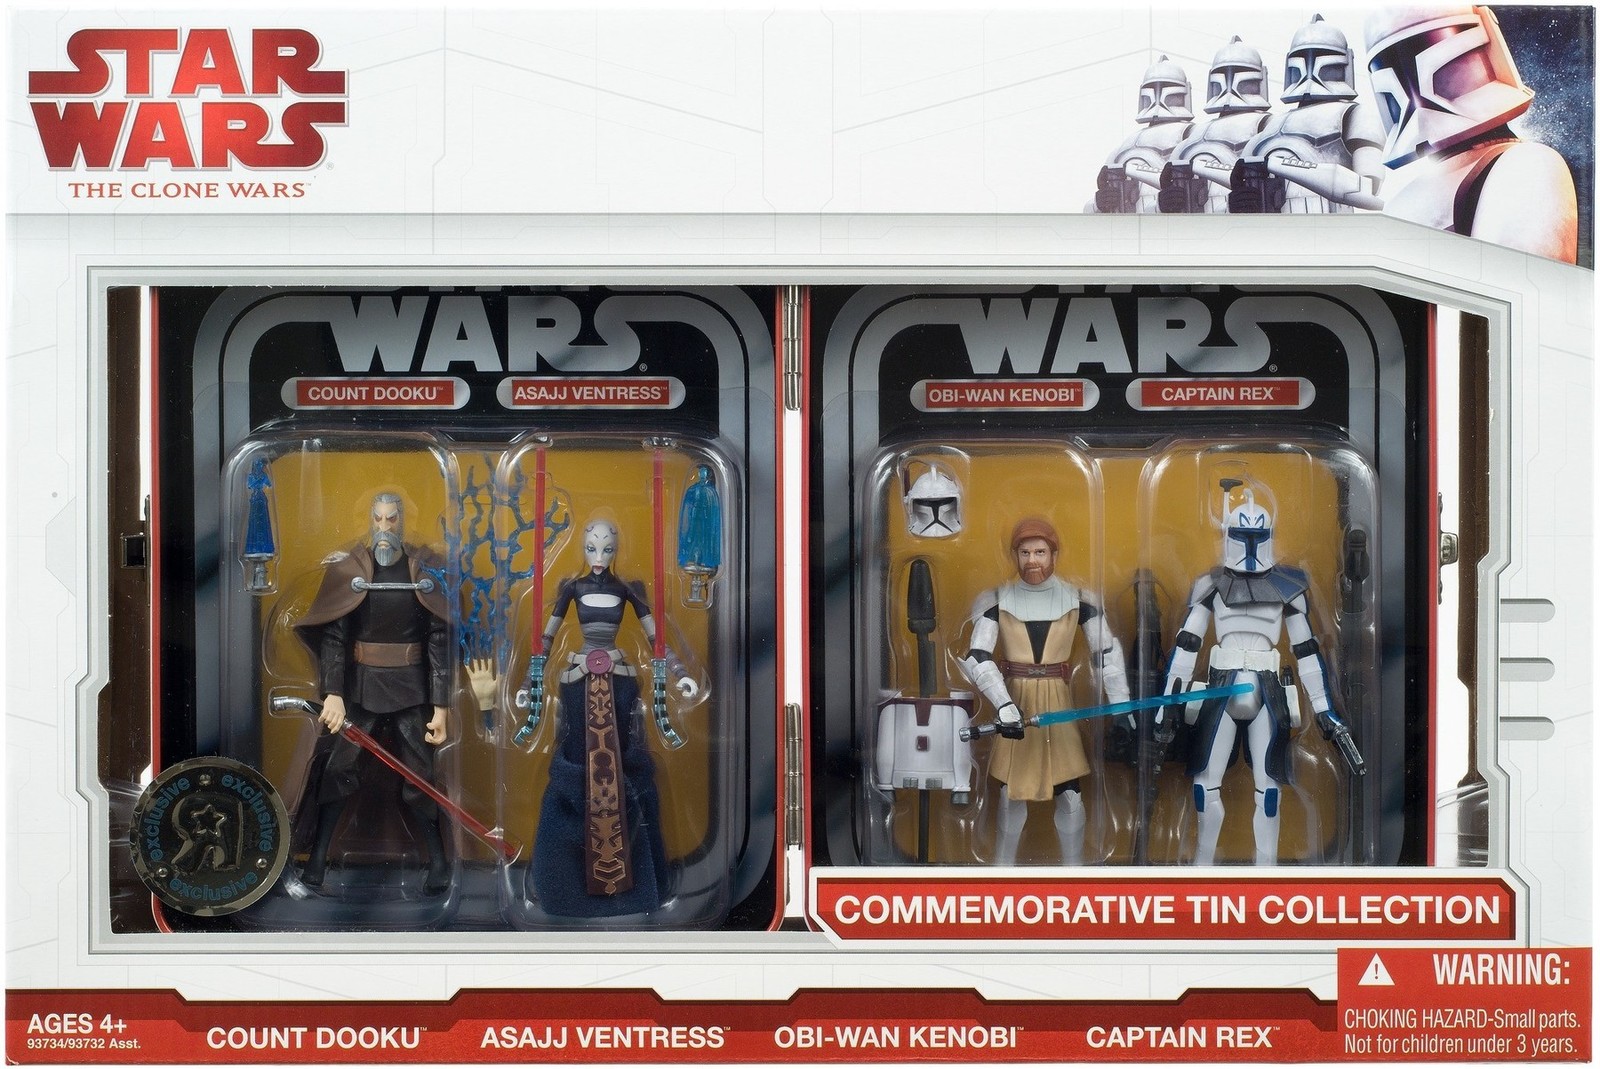 Star Wars Commemorative Tin Collection 4 Pack Mib The Clone Wars Toys R